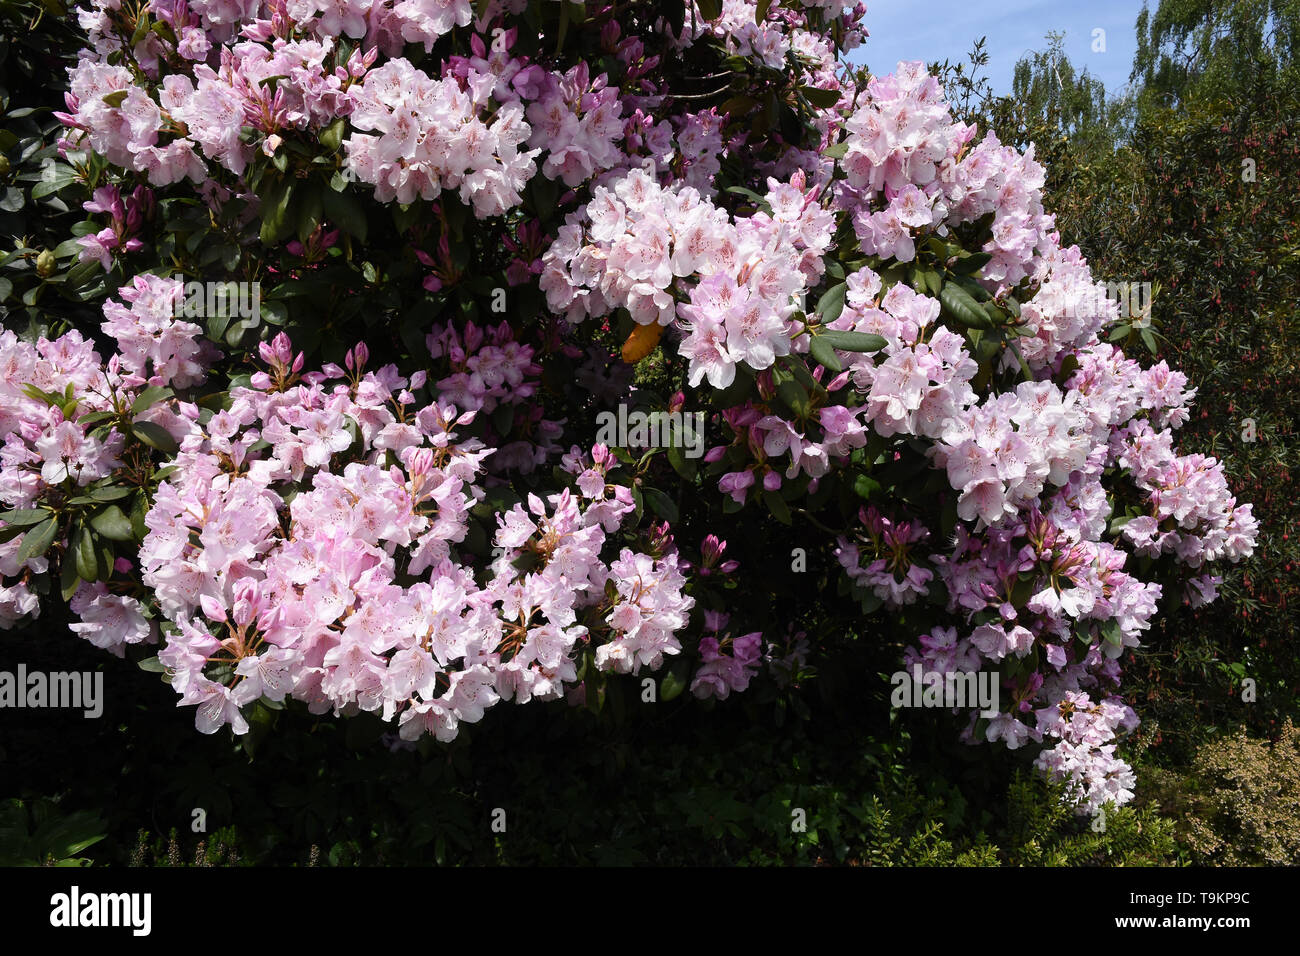 Rhododendrons, Kenwood , Hampstead Heath, Londres Banque D'Images